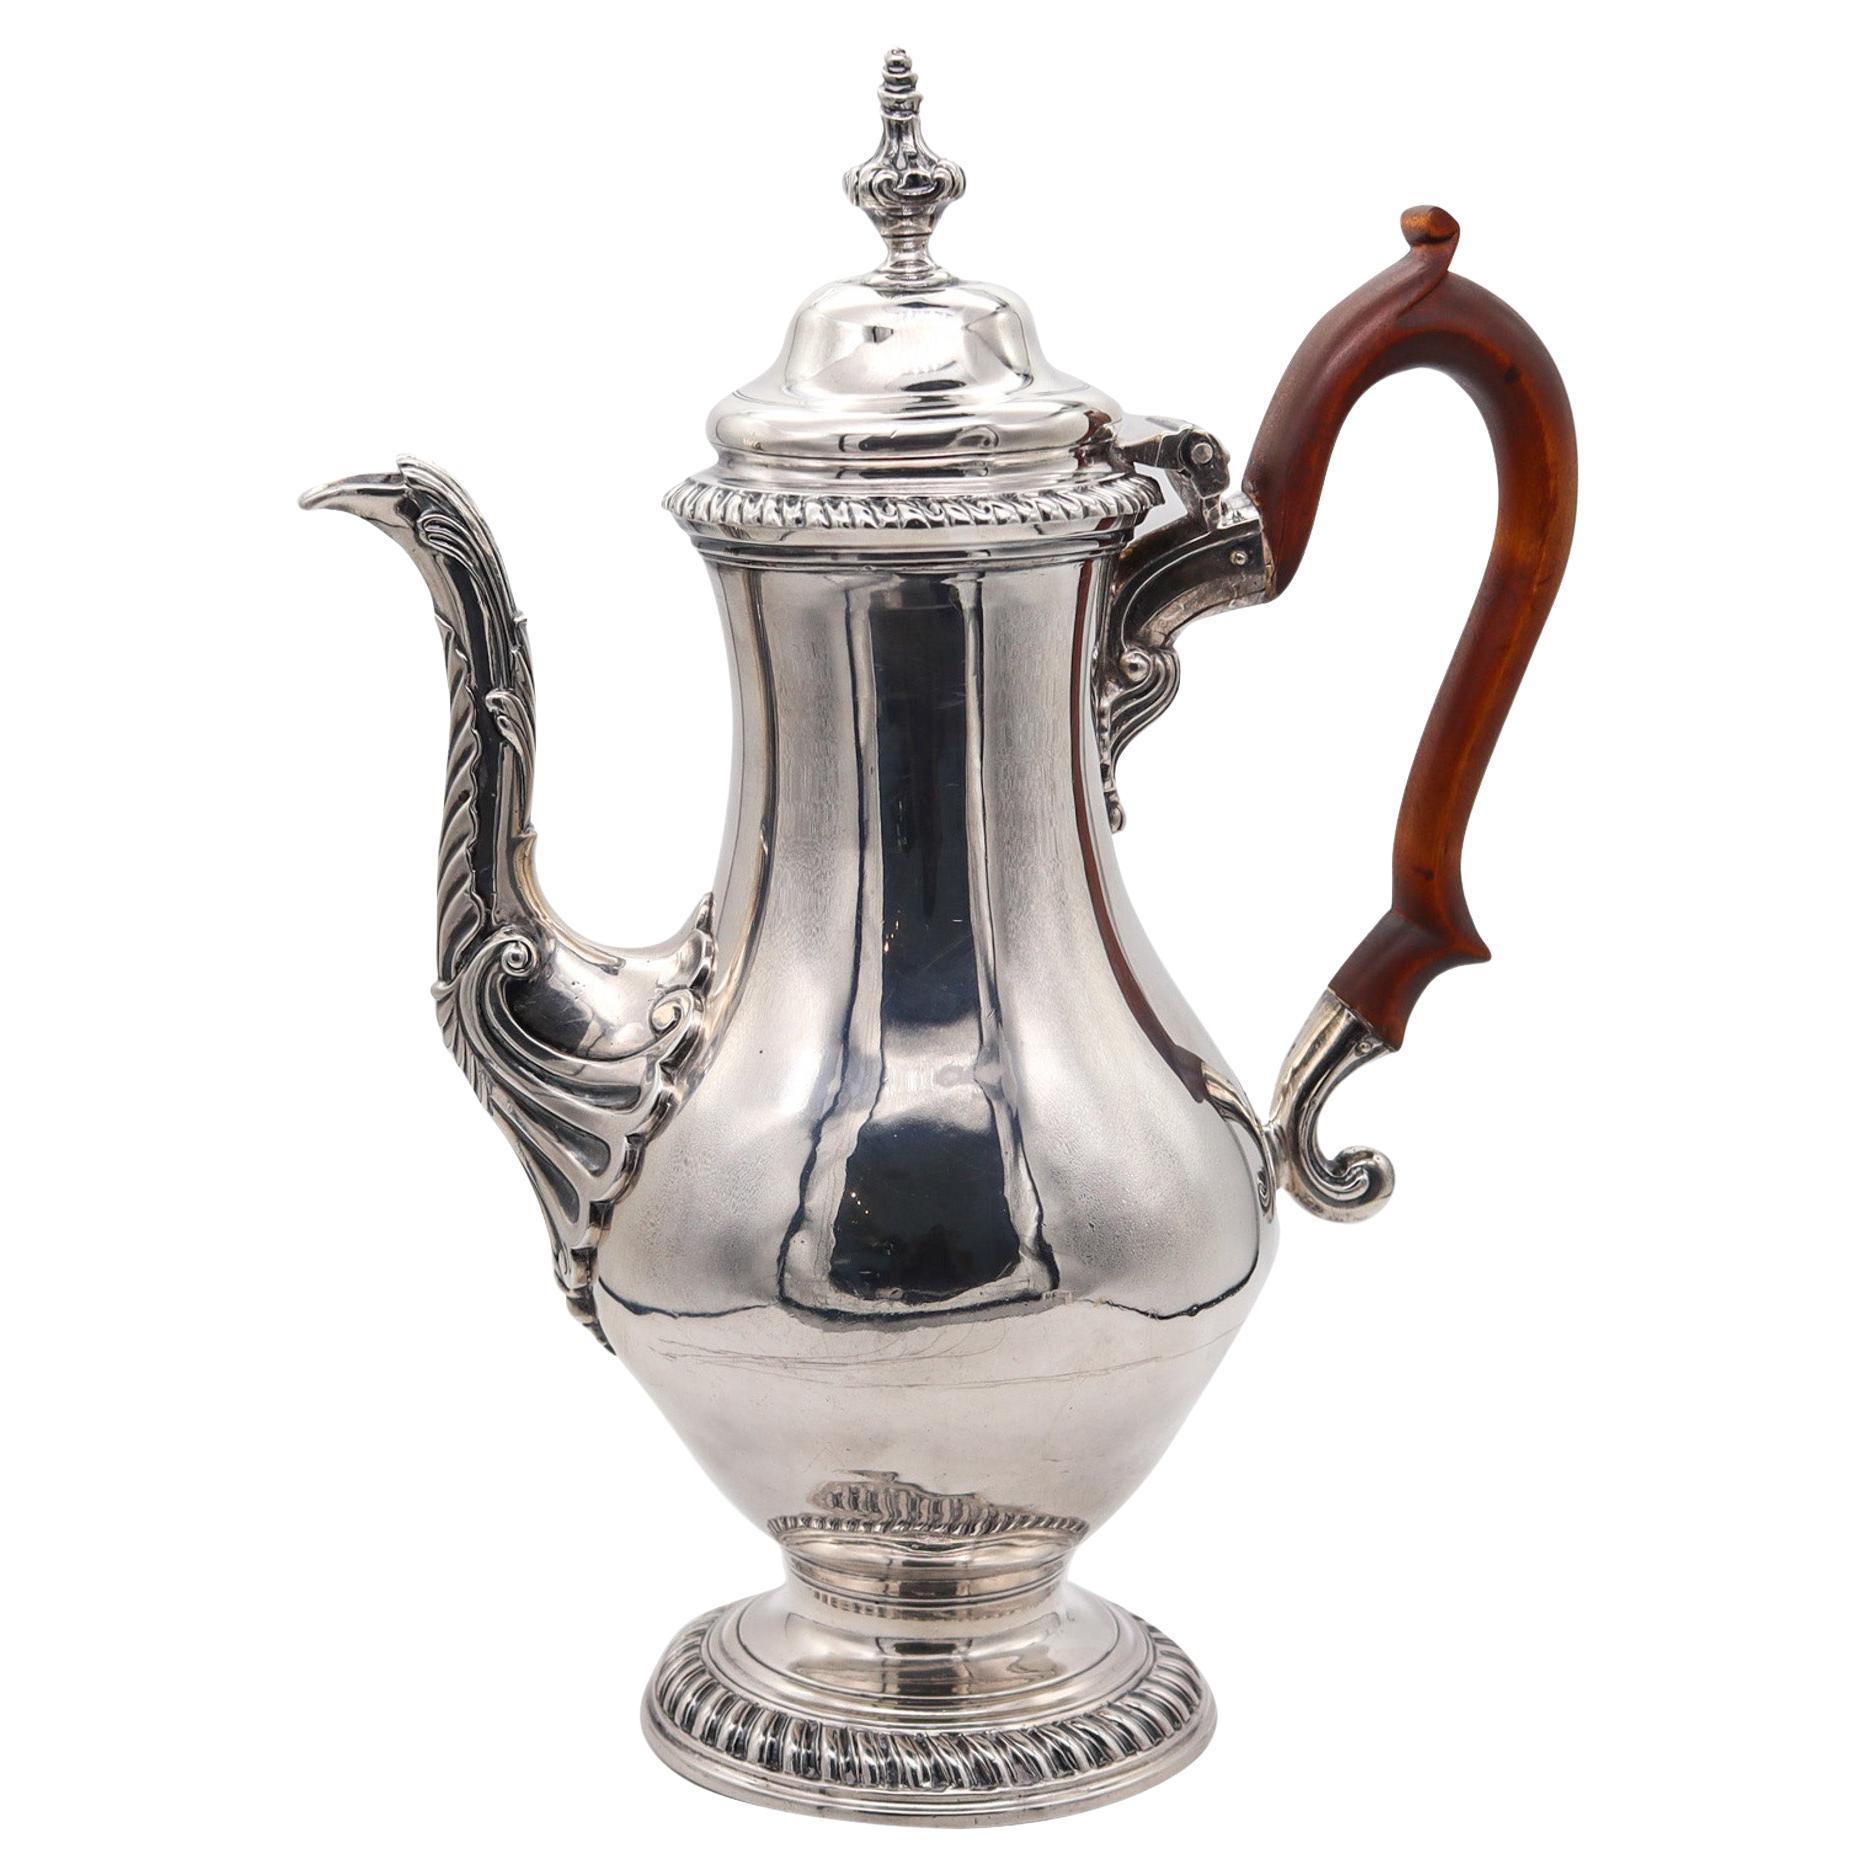 Jacob Marsh 1766 London Coffee Pot In .925 Sterling Silver And Carved Wood en vente